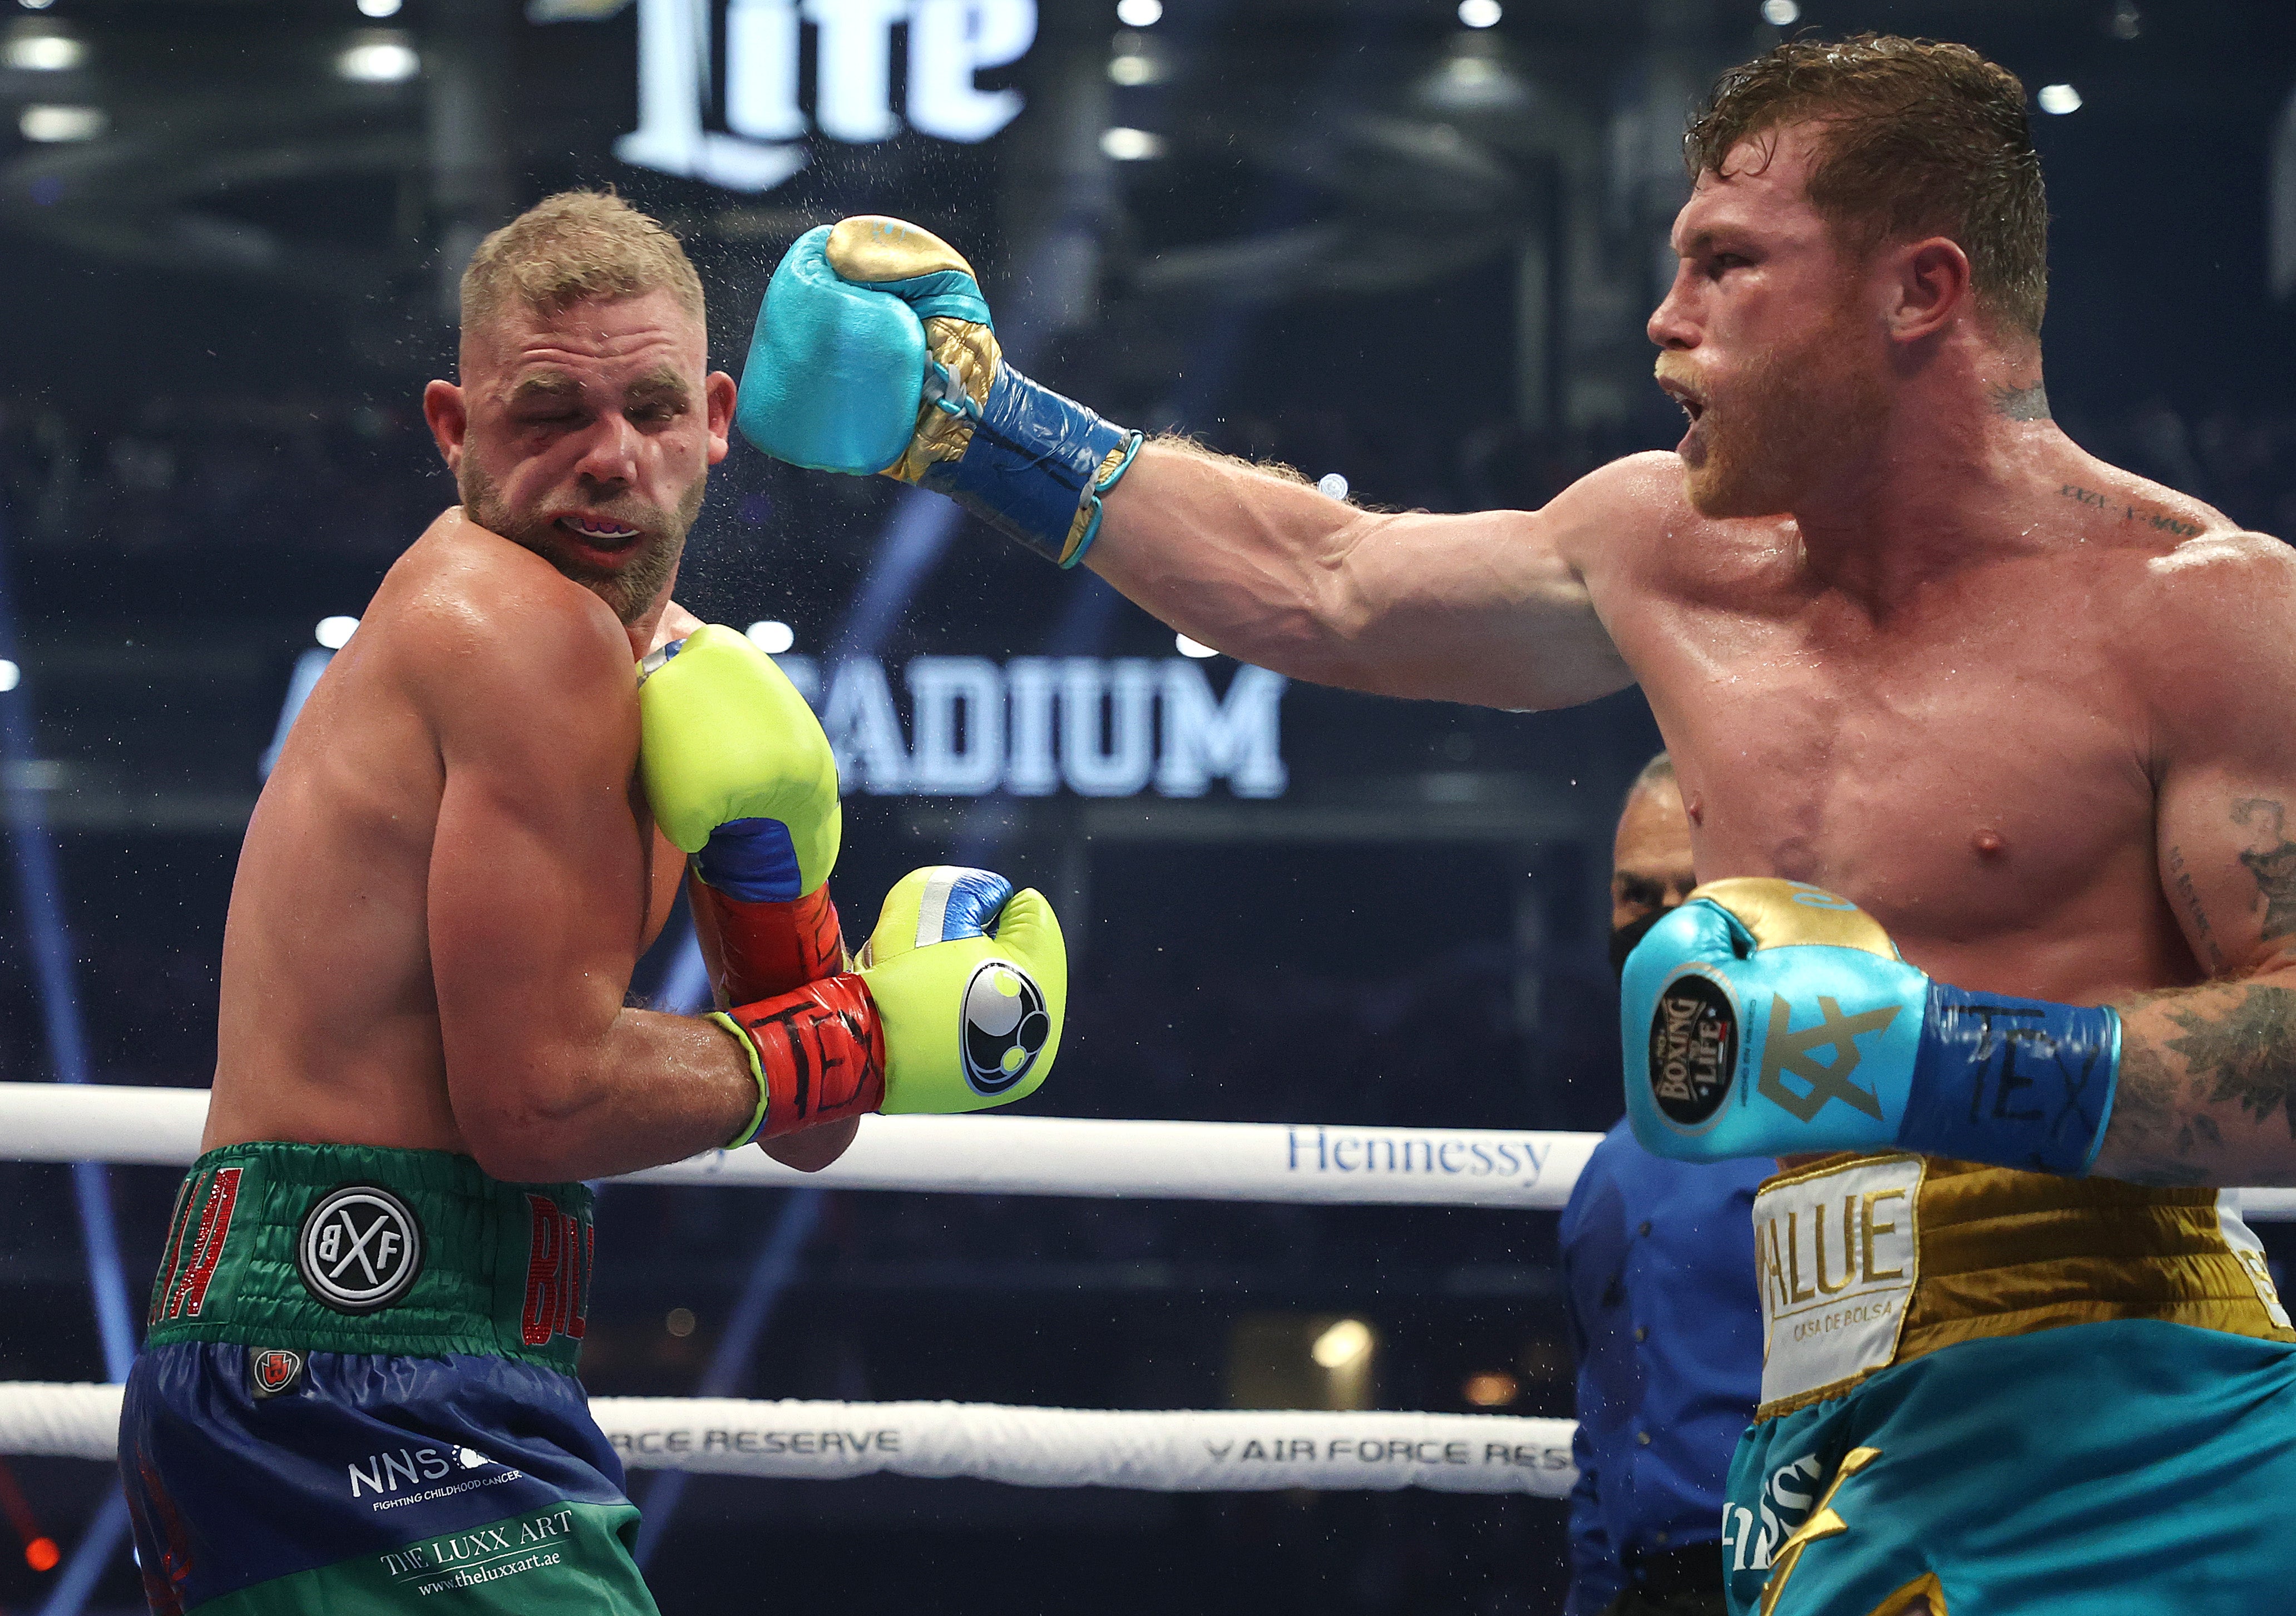 Billy Joe Saunders produced a brave showing in front of more than 70,000 fans in Texas